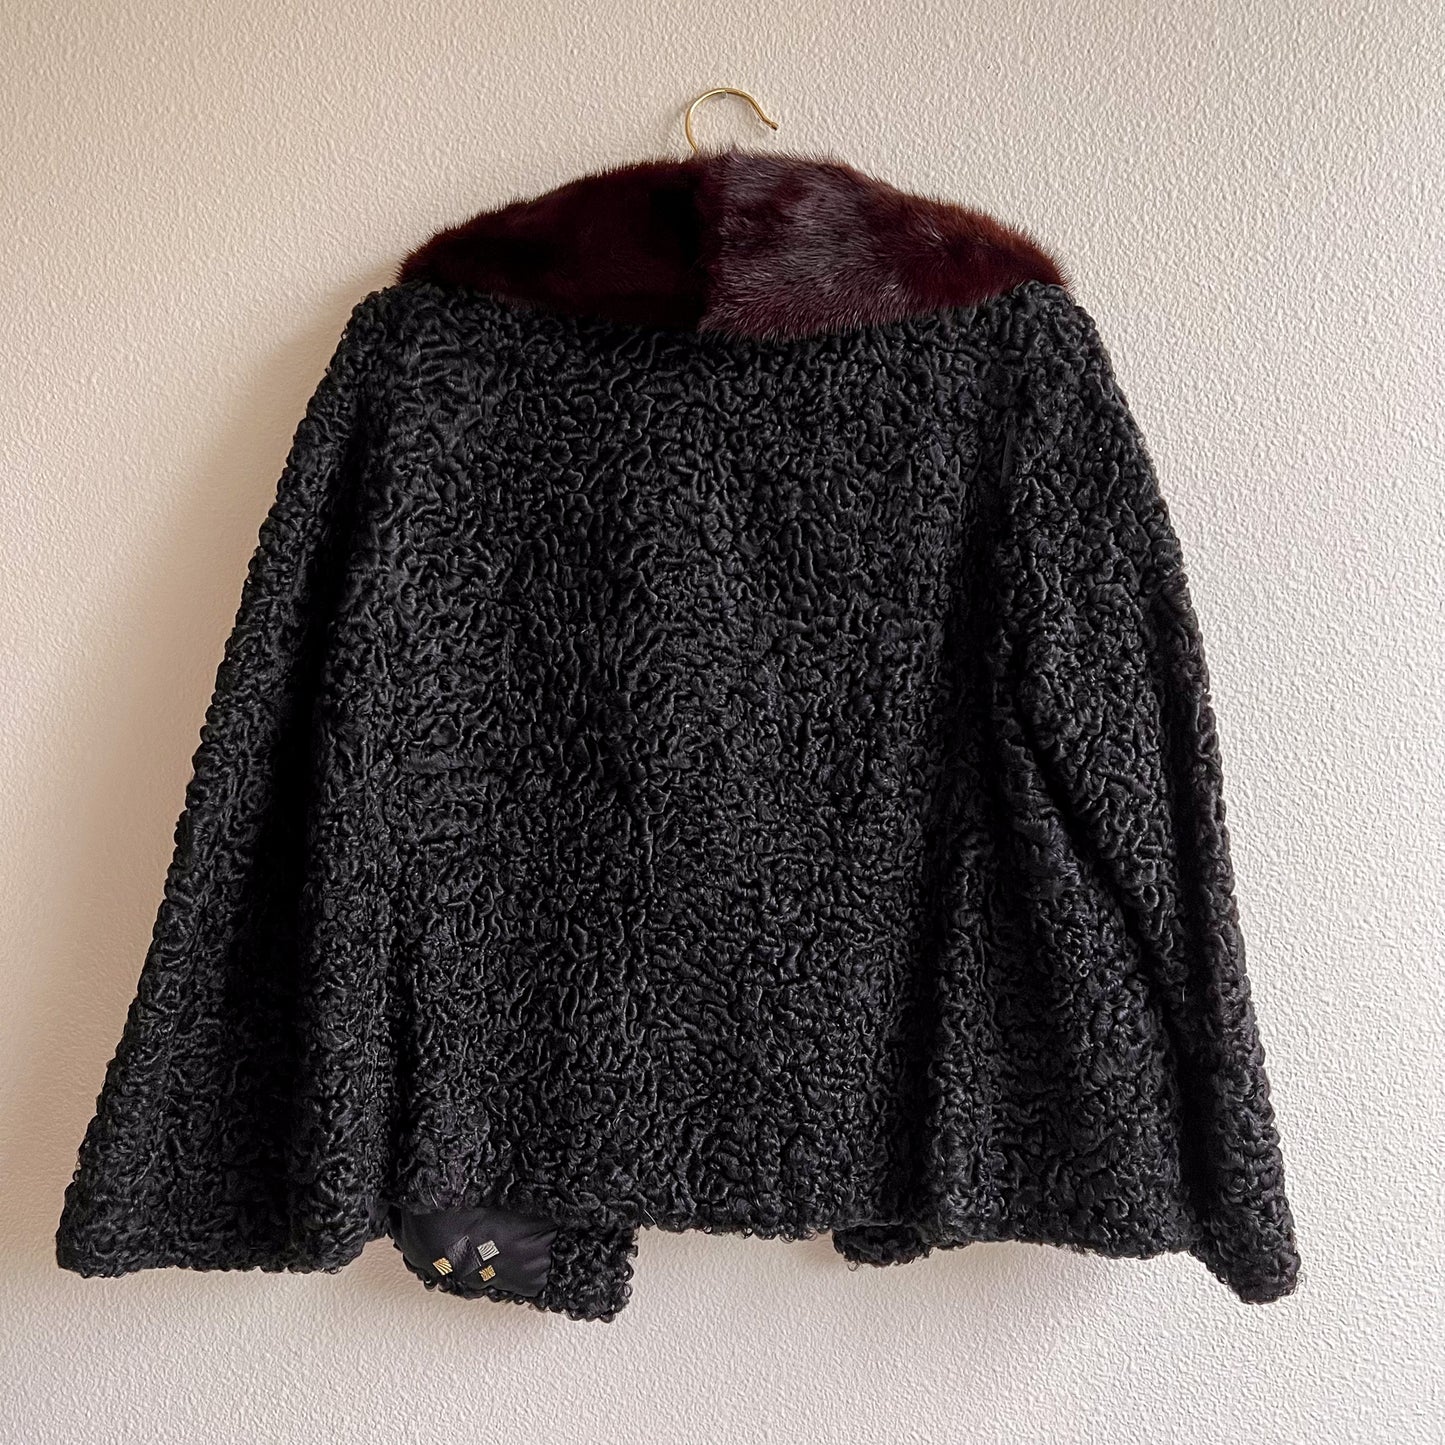 Darling 1950s Black Fur Jacket With Silk Lining (S/M)